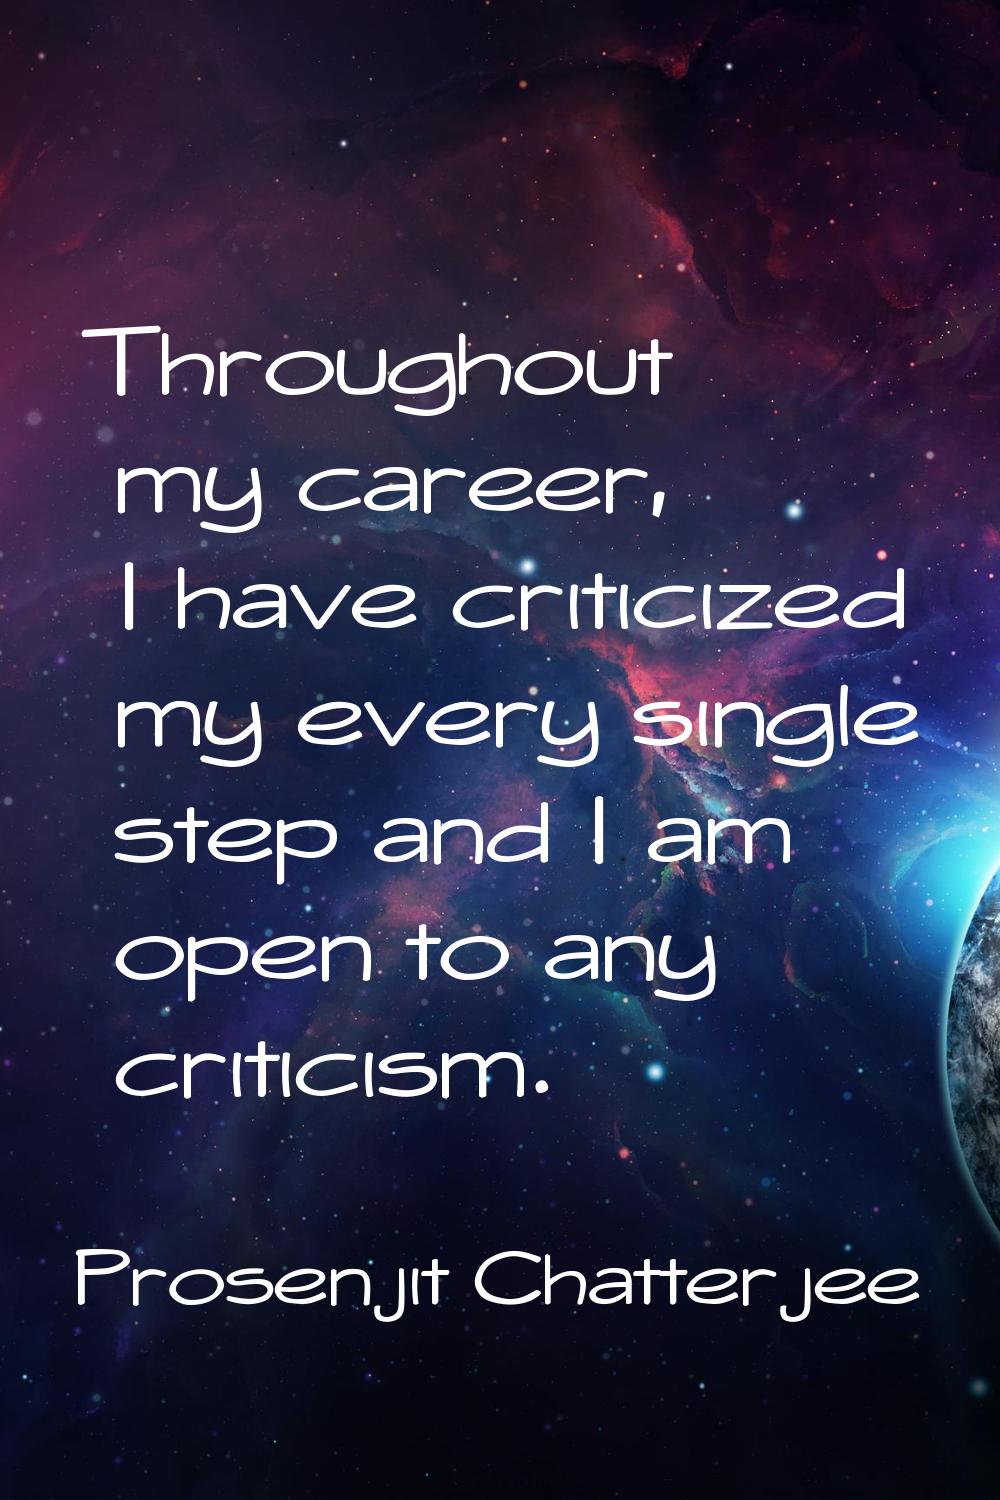 Throughout my career, I have criticized my every single step and I am open to any criticism.